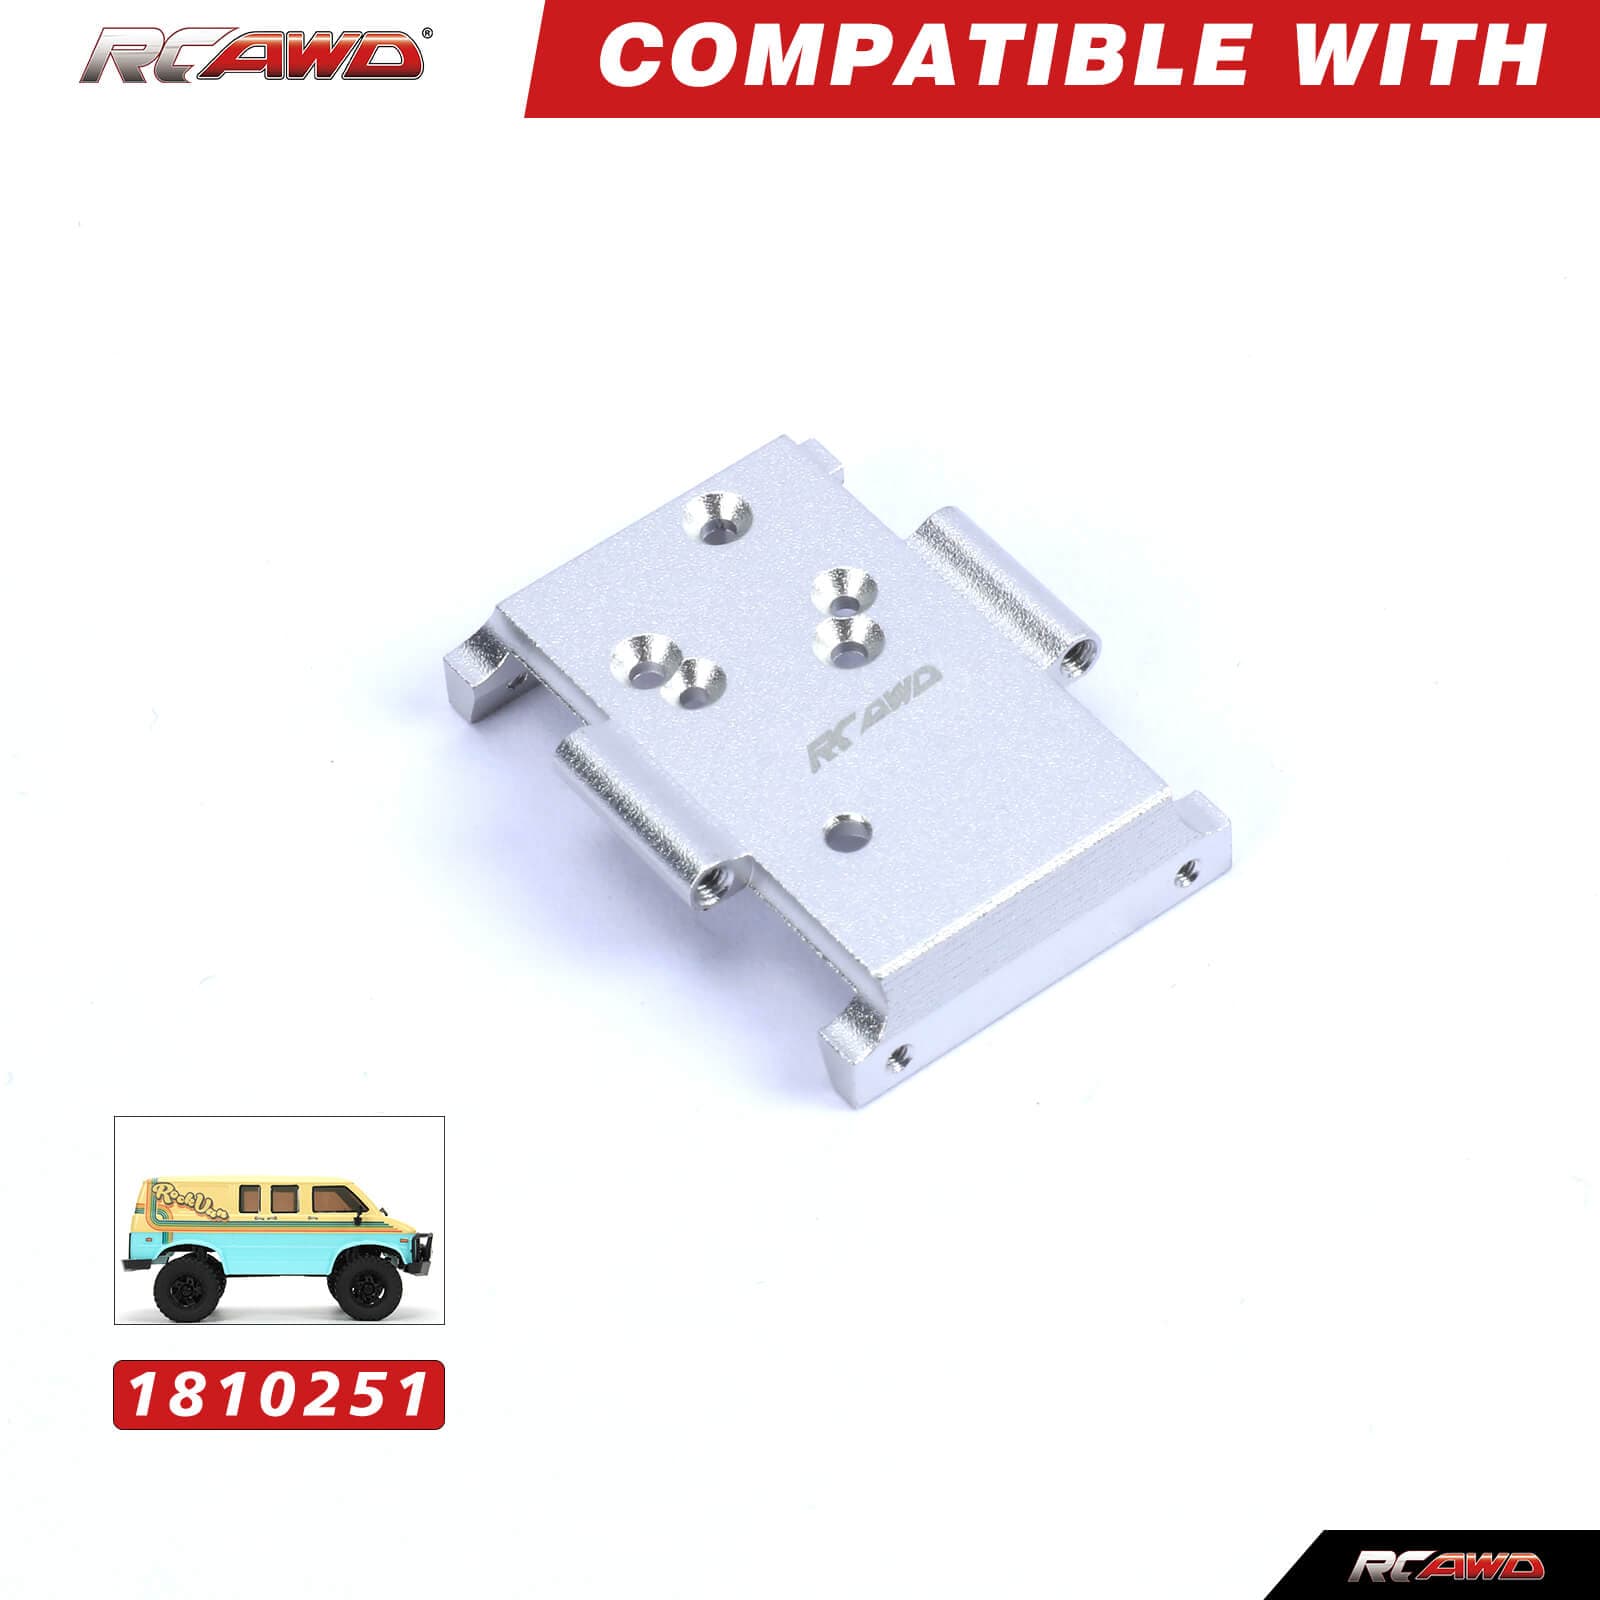 RCAWD HobbyPlus CR18 Upgrades Transmission Gearbox Mount 240302 - RCAWD